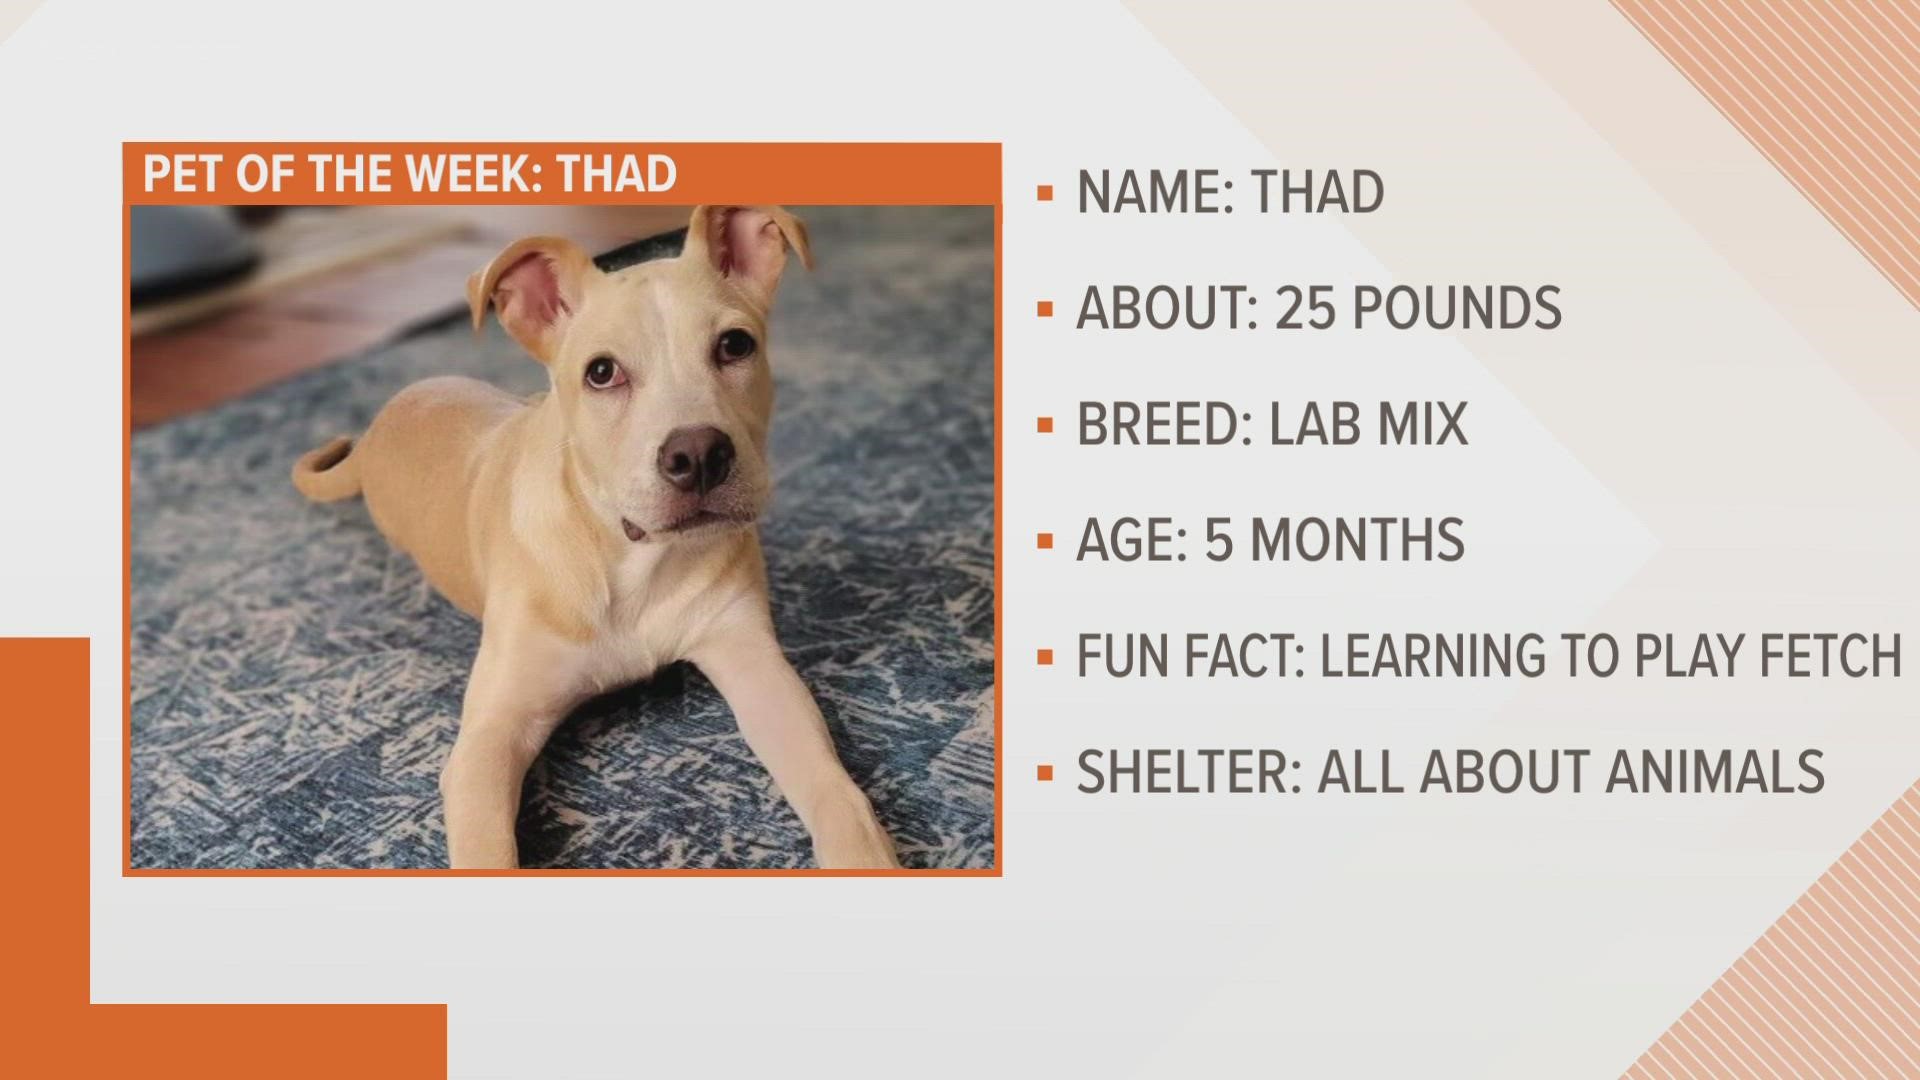 This weeks pet is a 5-month-old named Thad.